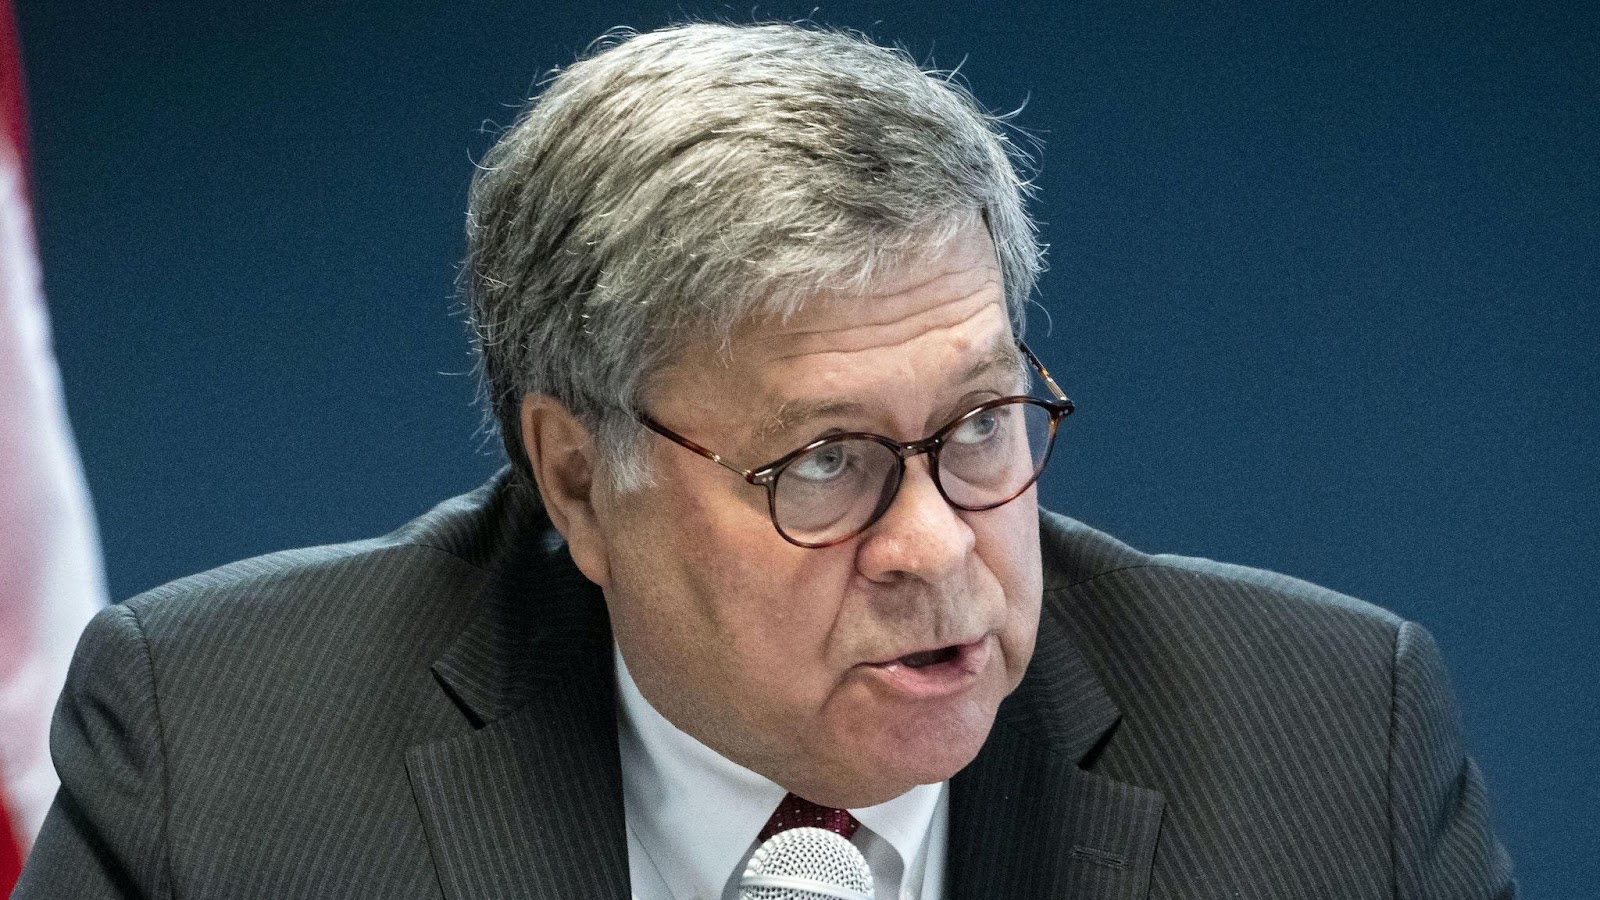 William Barr, U.S. attorney general, speaks during a roundtable discussion with federal, state, and local officials, not pictured, at the U.S. Attorney's Office in Atlanta, Georgia, U.S., on Monday, Sept. 21, 2020. Barr said the federal government is awarding more than $100 million in grants to target human trafficking. The money will go to task forces combatting human trafficking, to victim services and victim housing, reports the Associated Press.